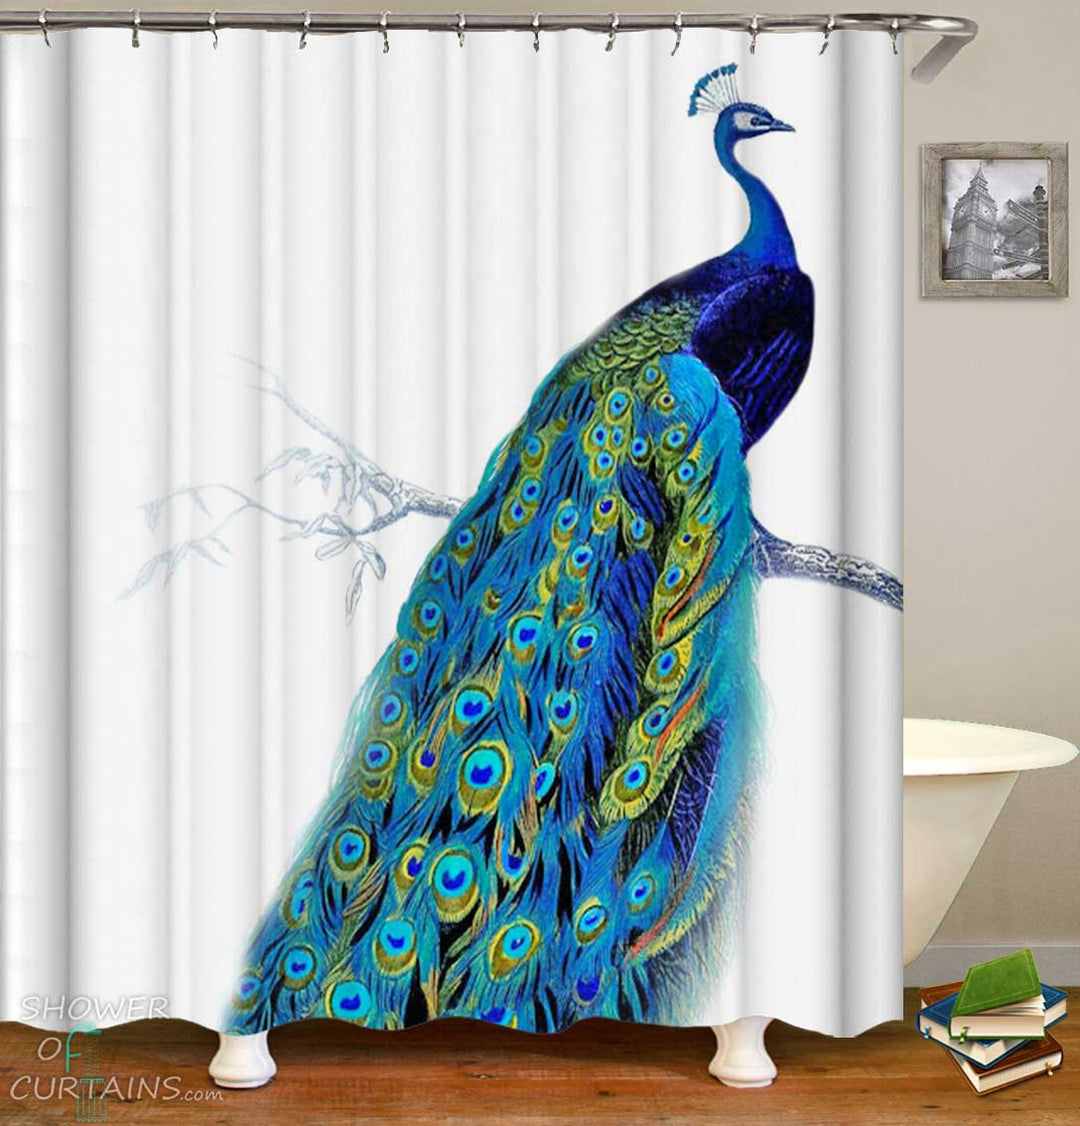 Shower Curtains with Beautiful Turquoise Peacock